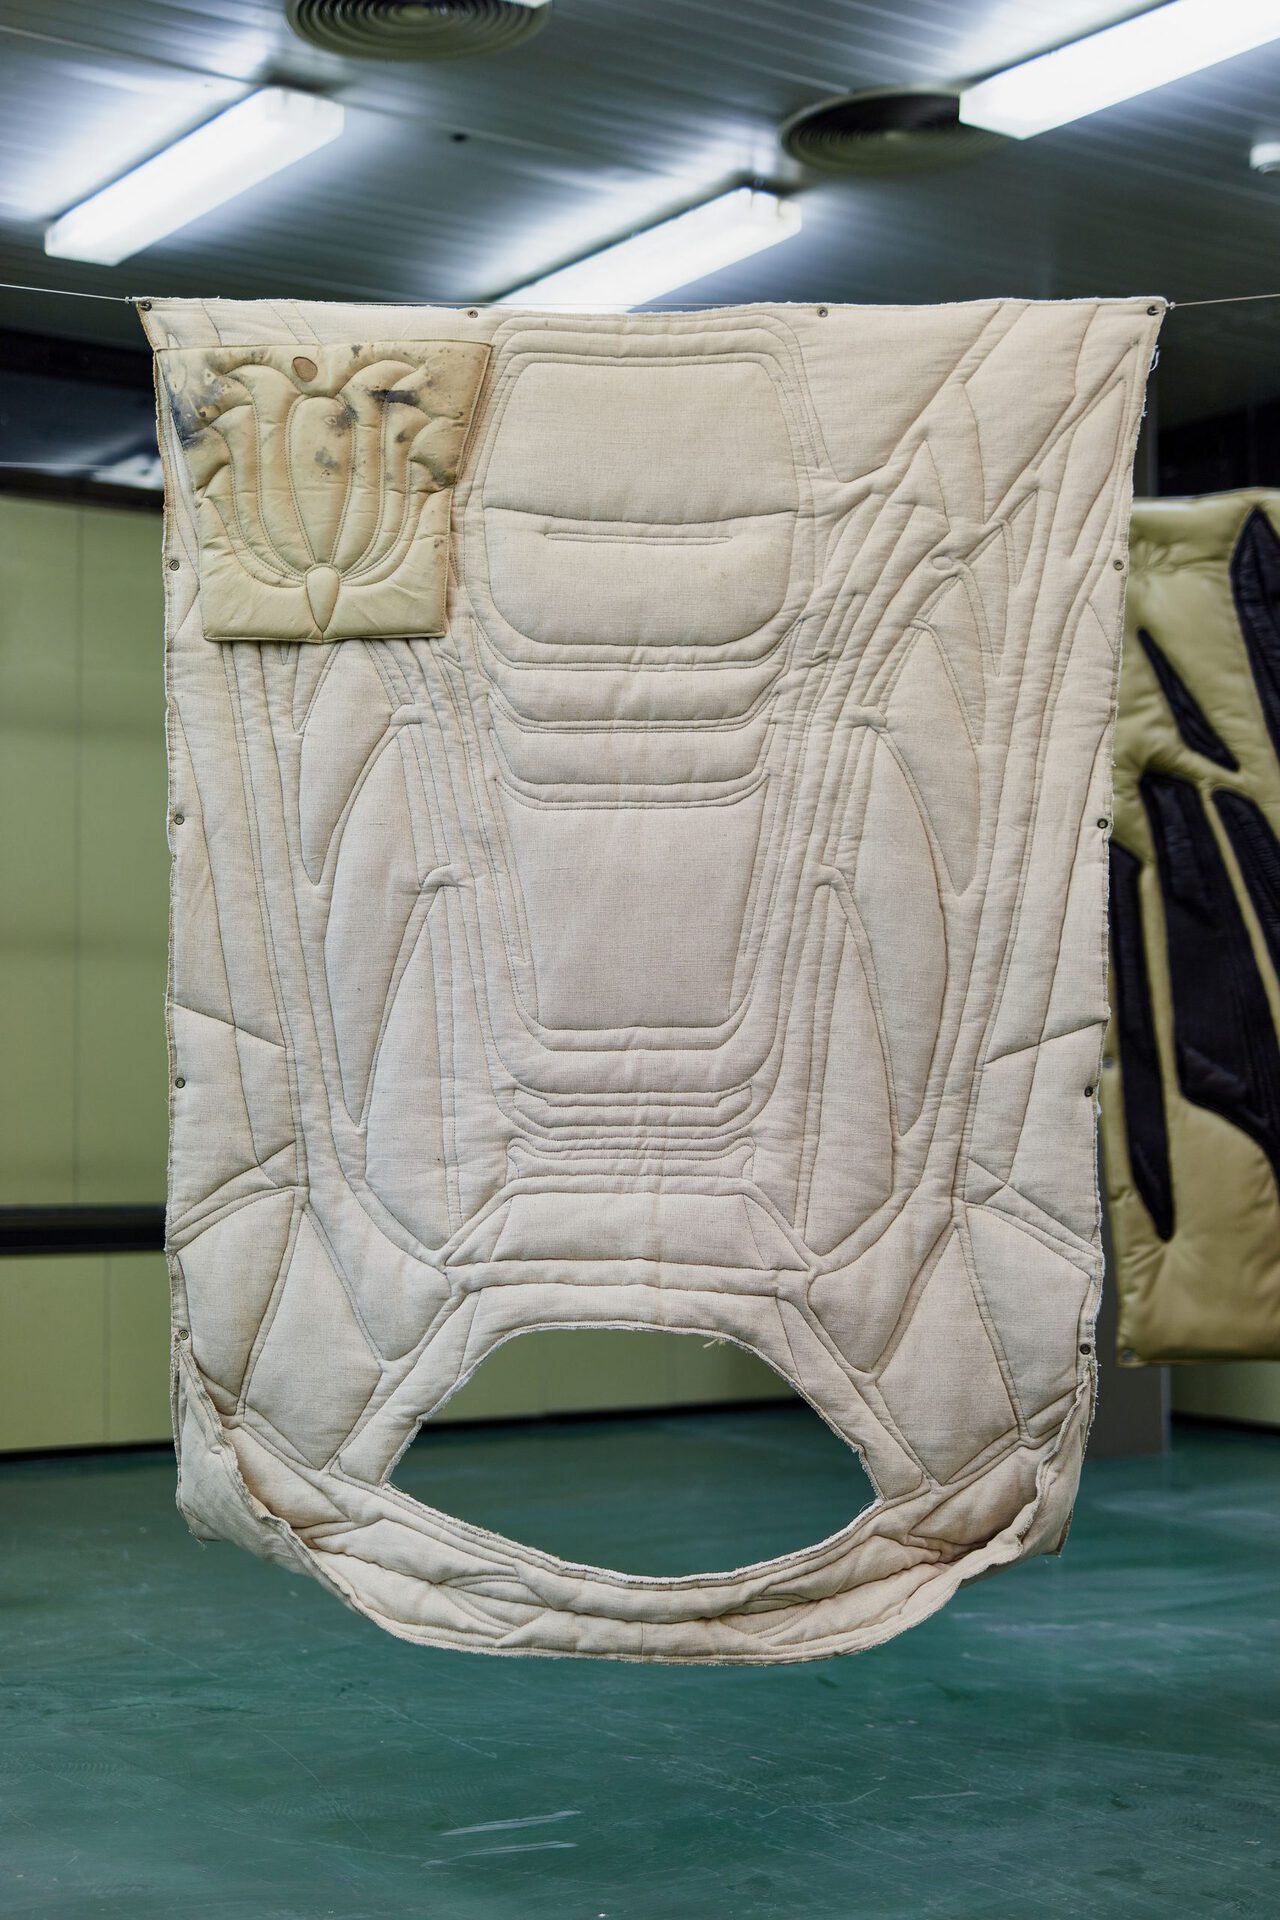 Adrian Kiss, Dunyha Active, 2020, Quilted leather, linen, 200 ×140 cm